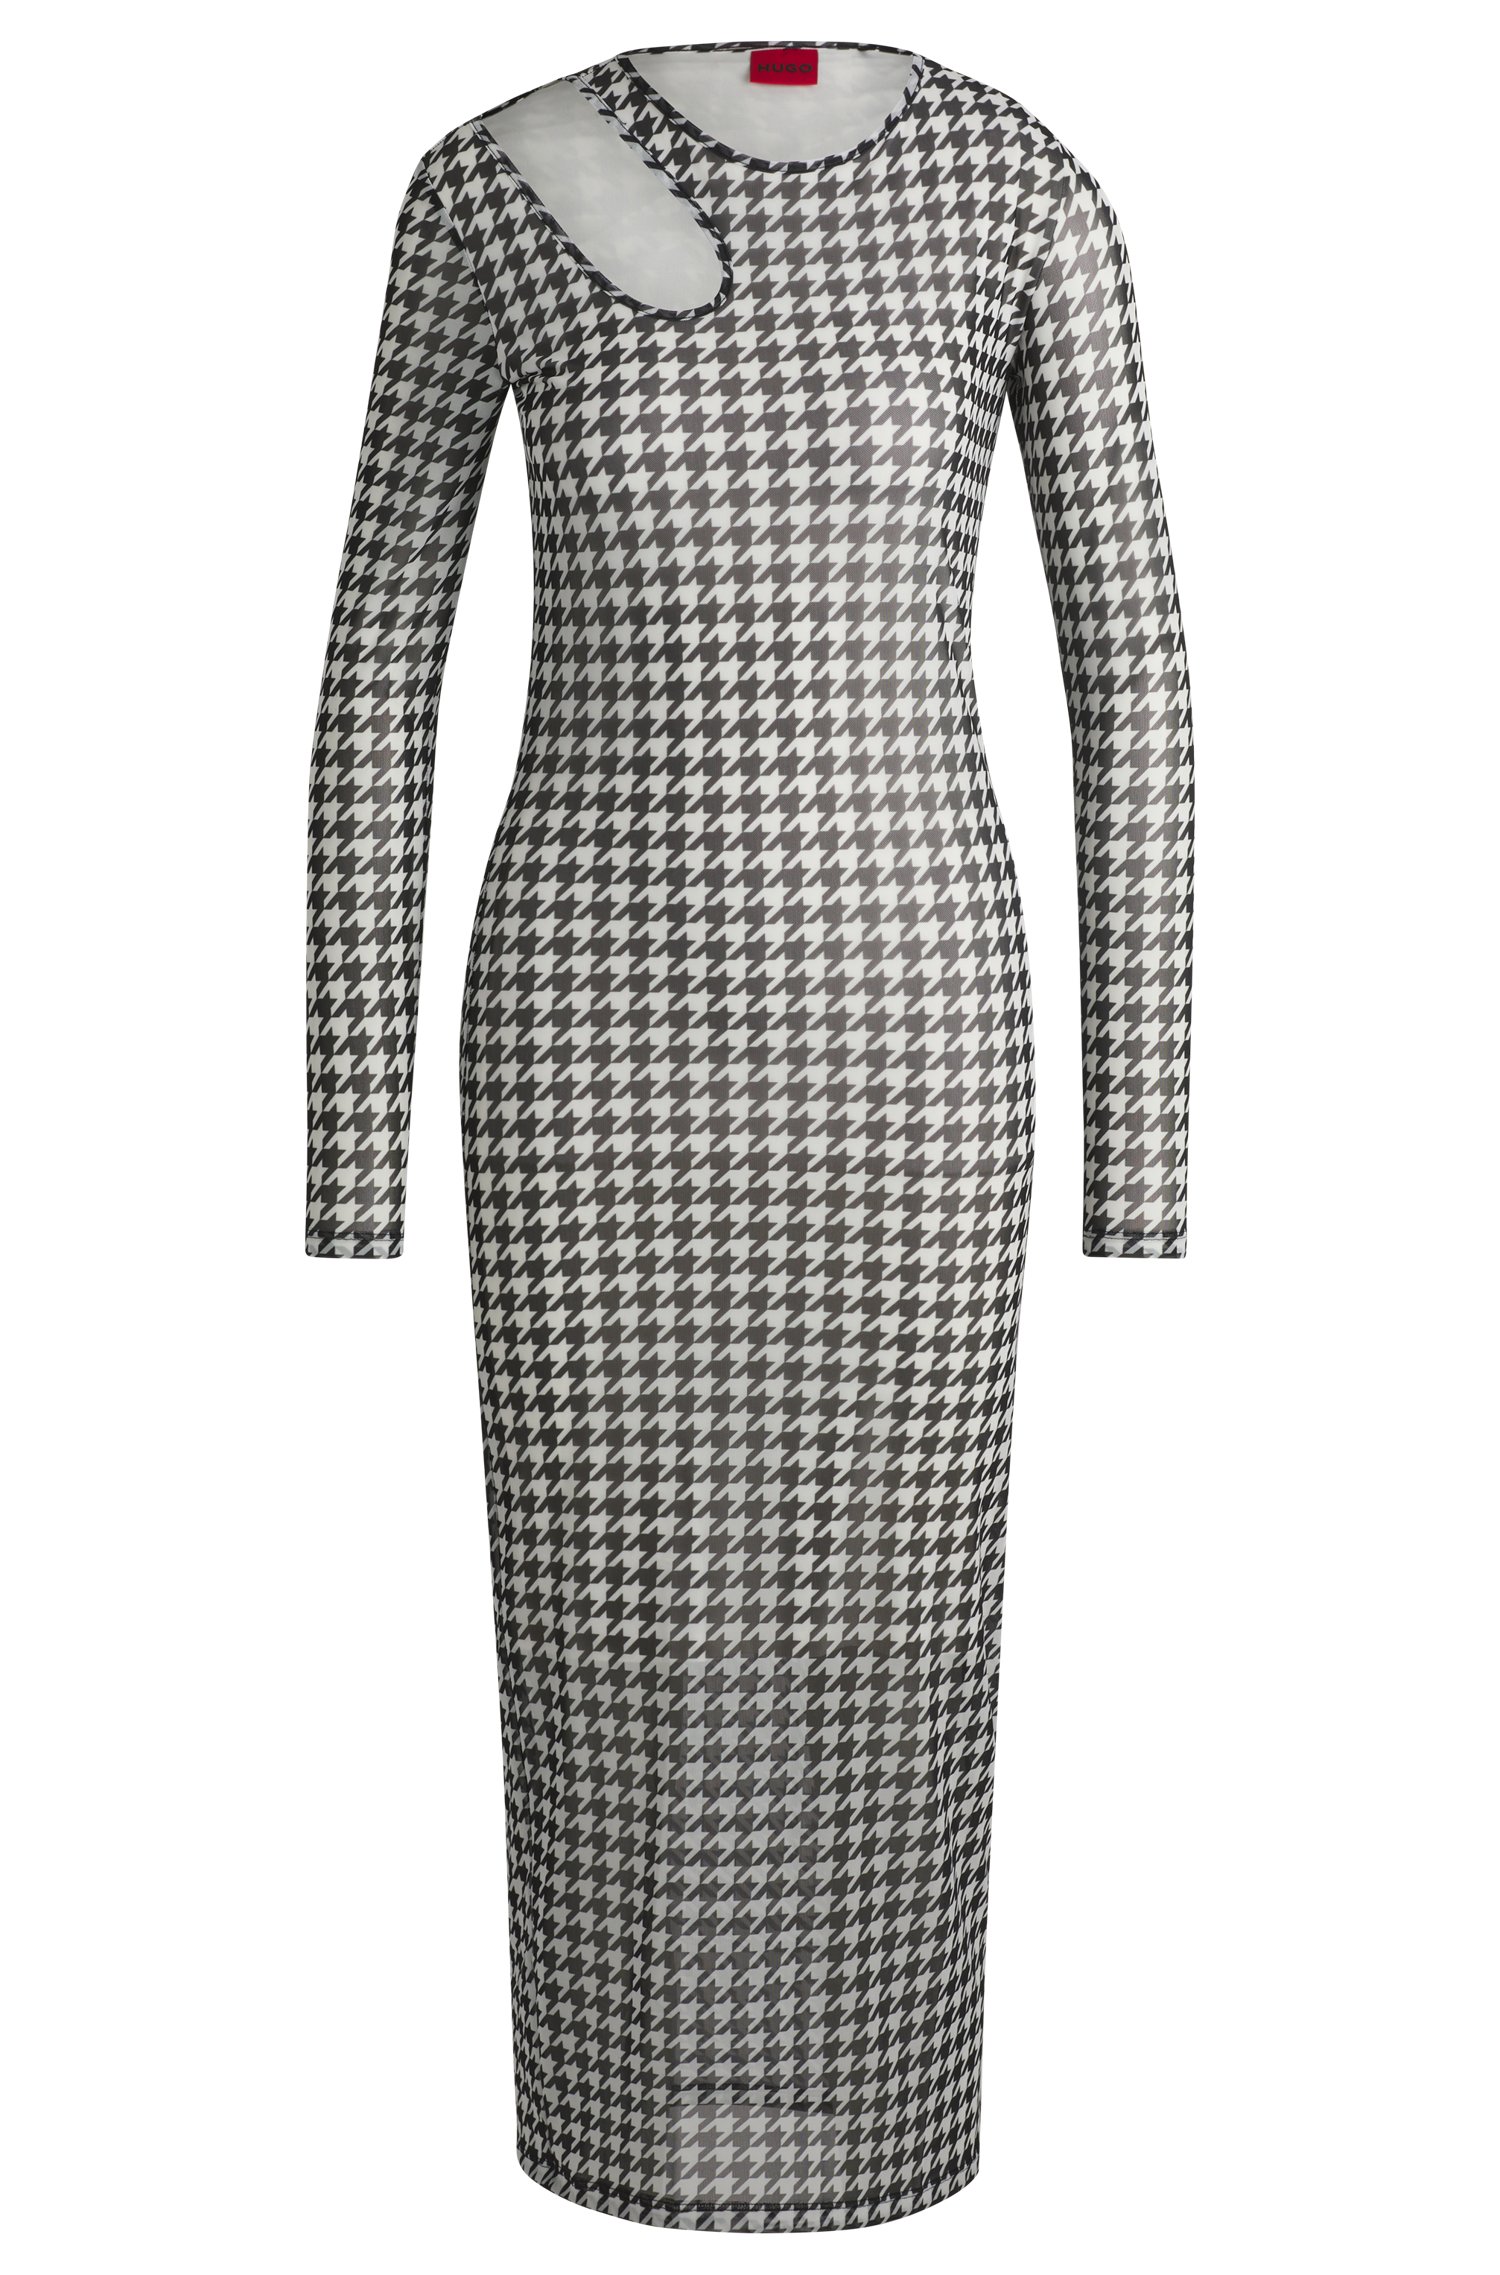 Printed-mesh dress with cut-out neckline